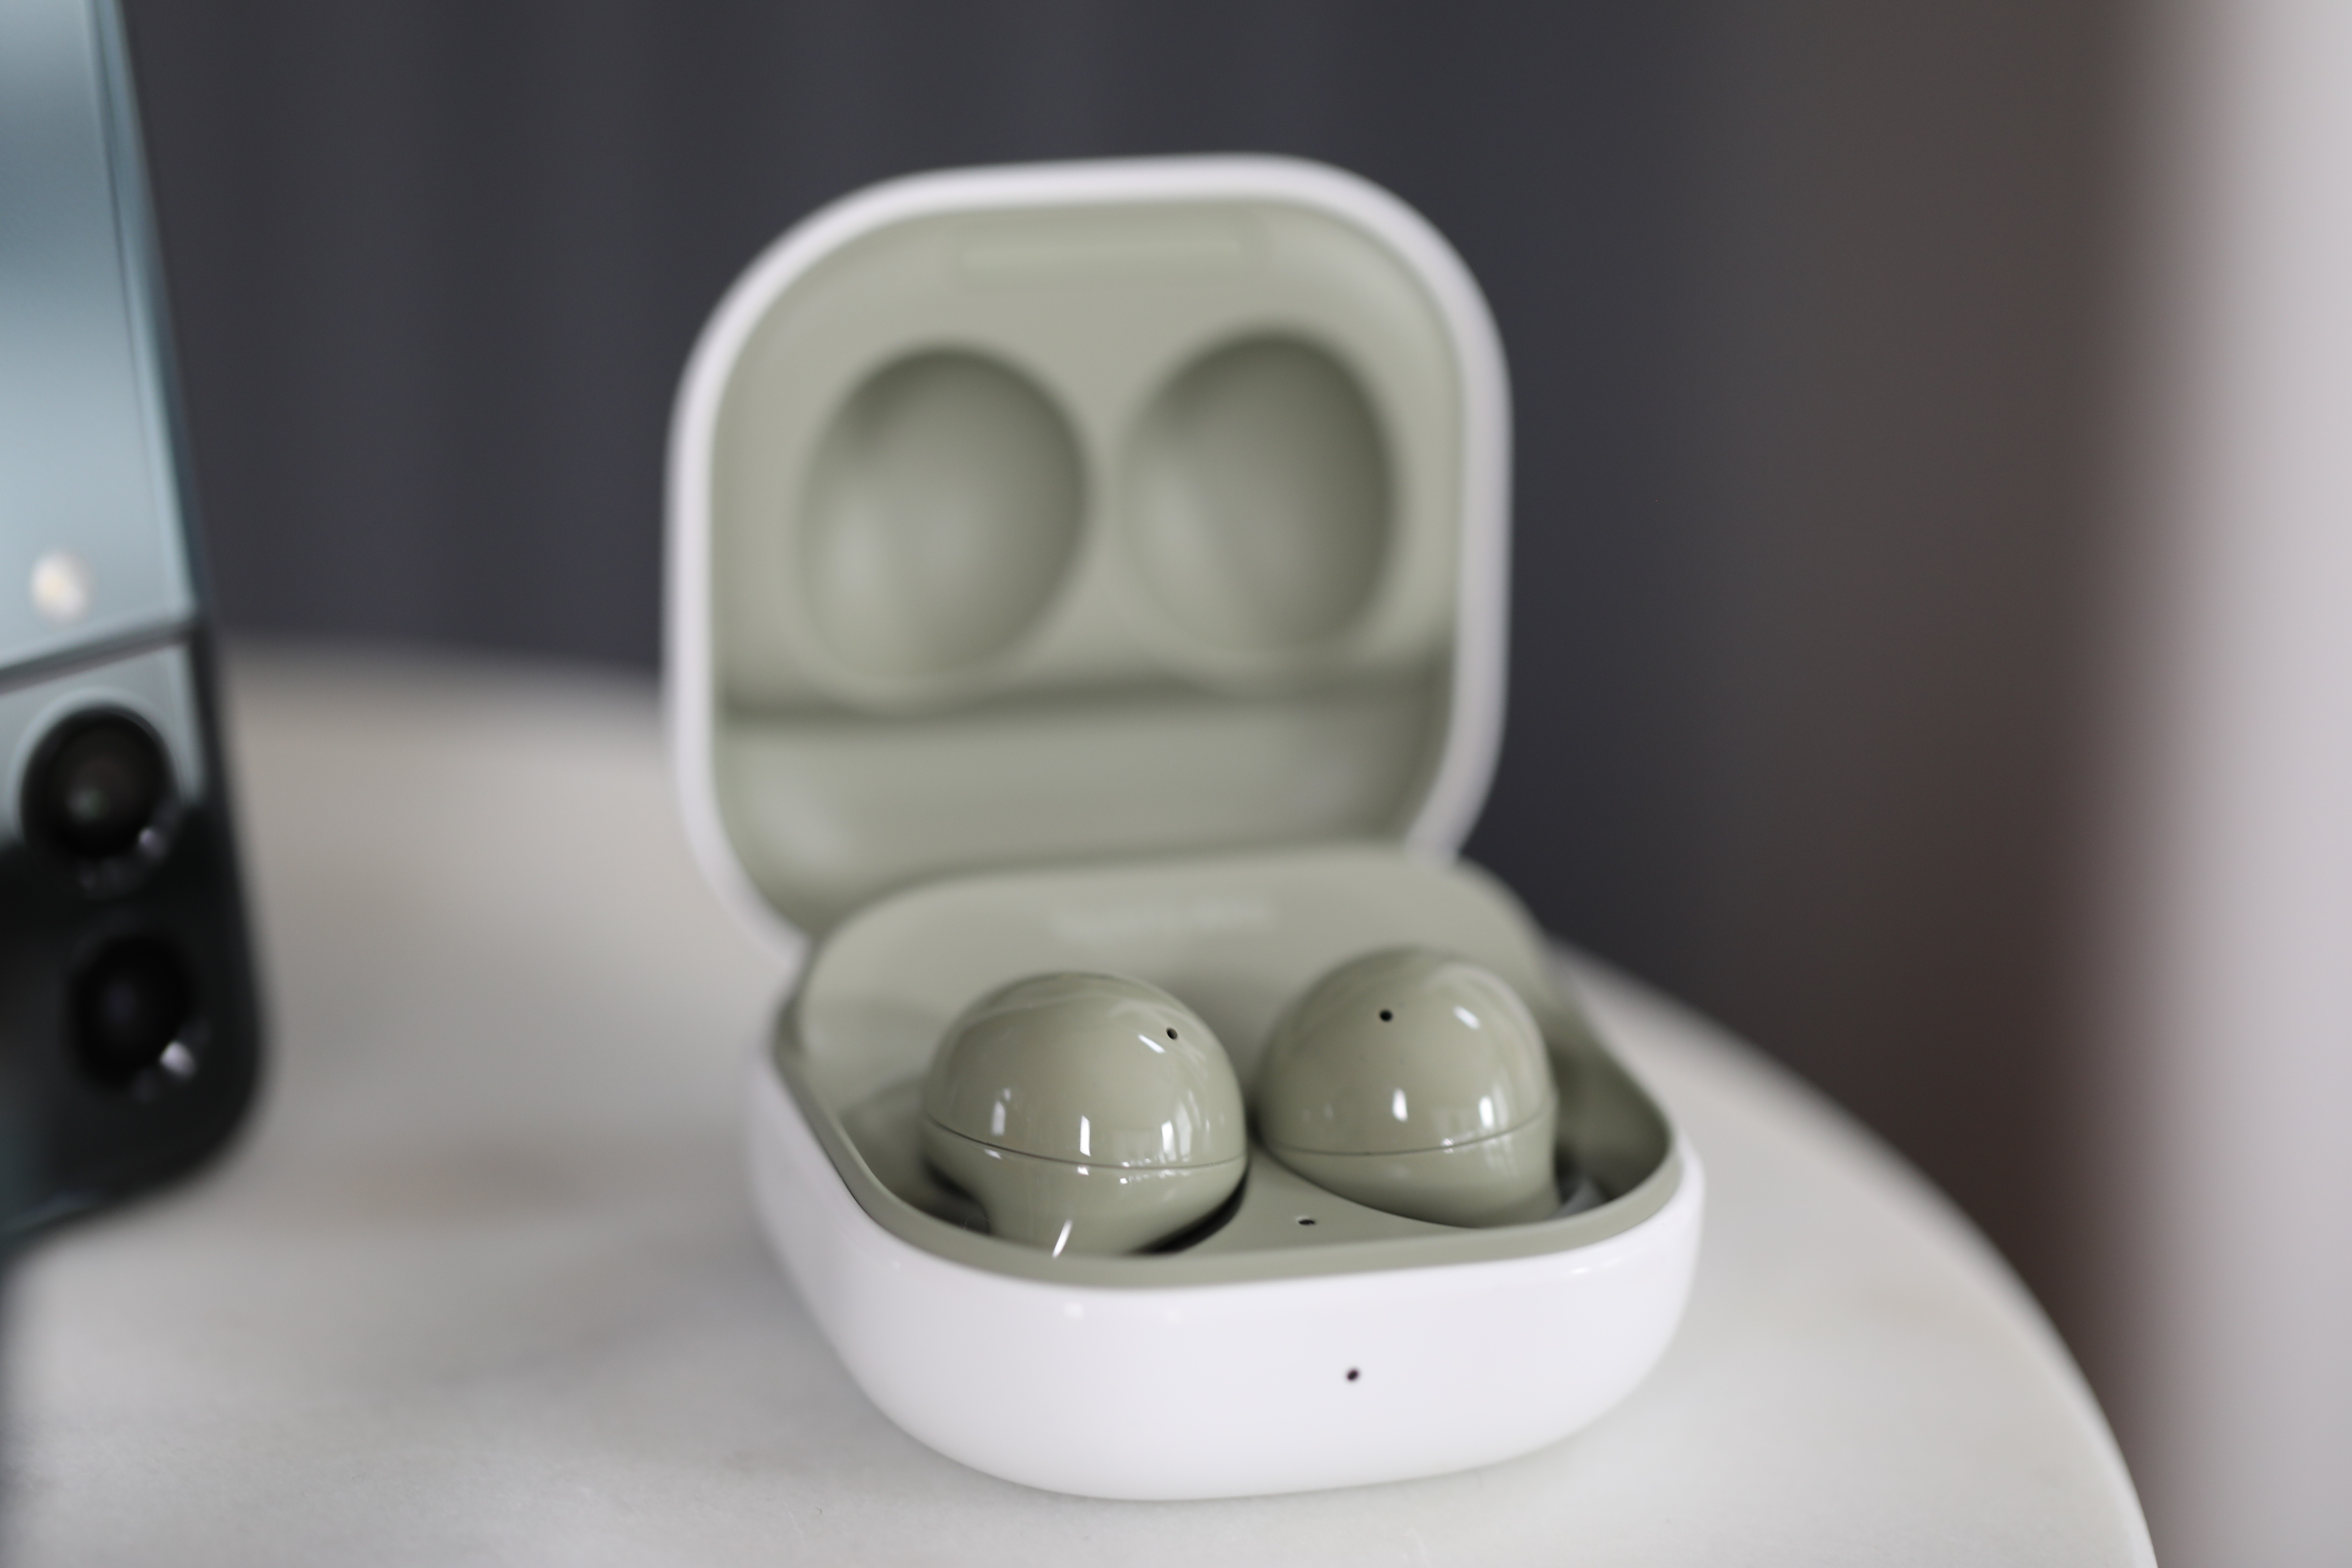 Samsung brings active noise cancellation to its entry-level Galaxy Buds